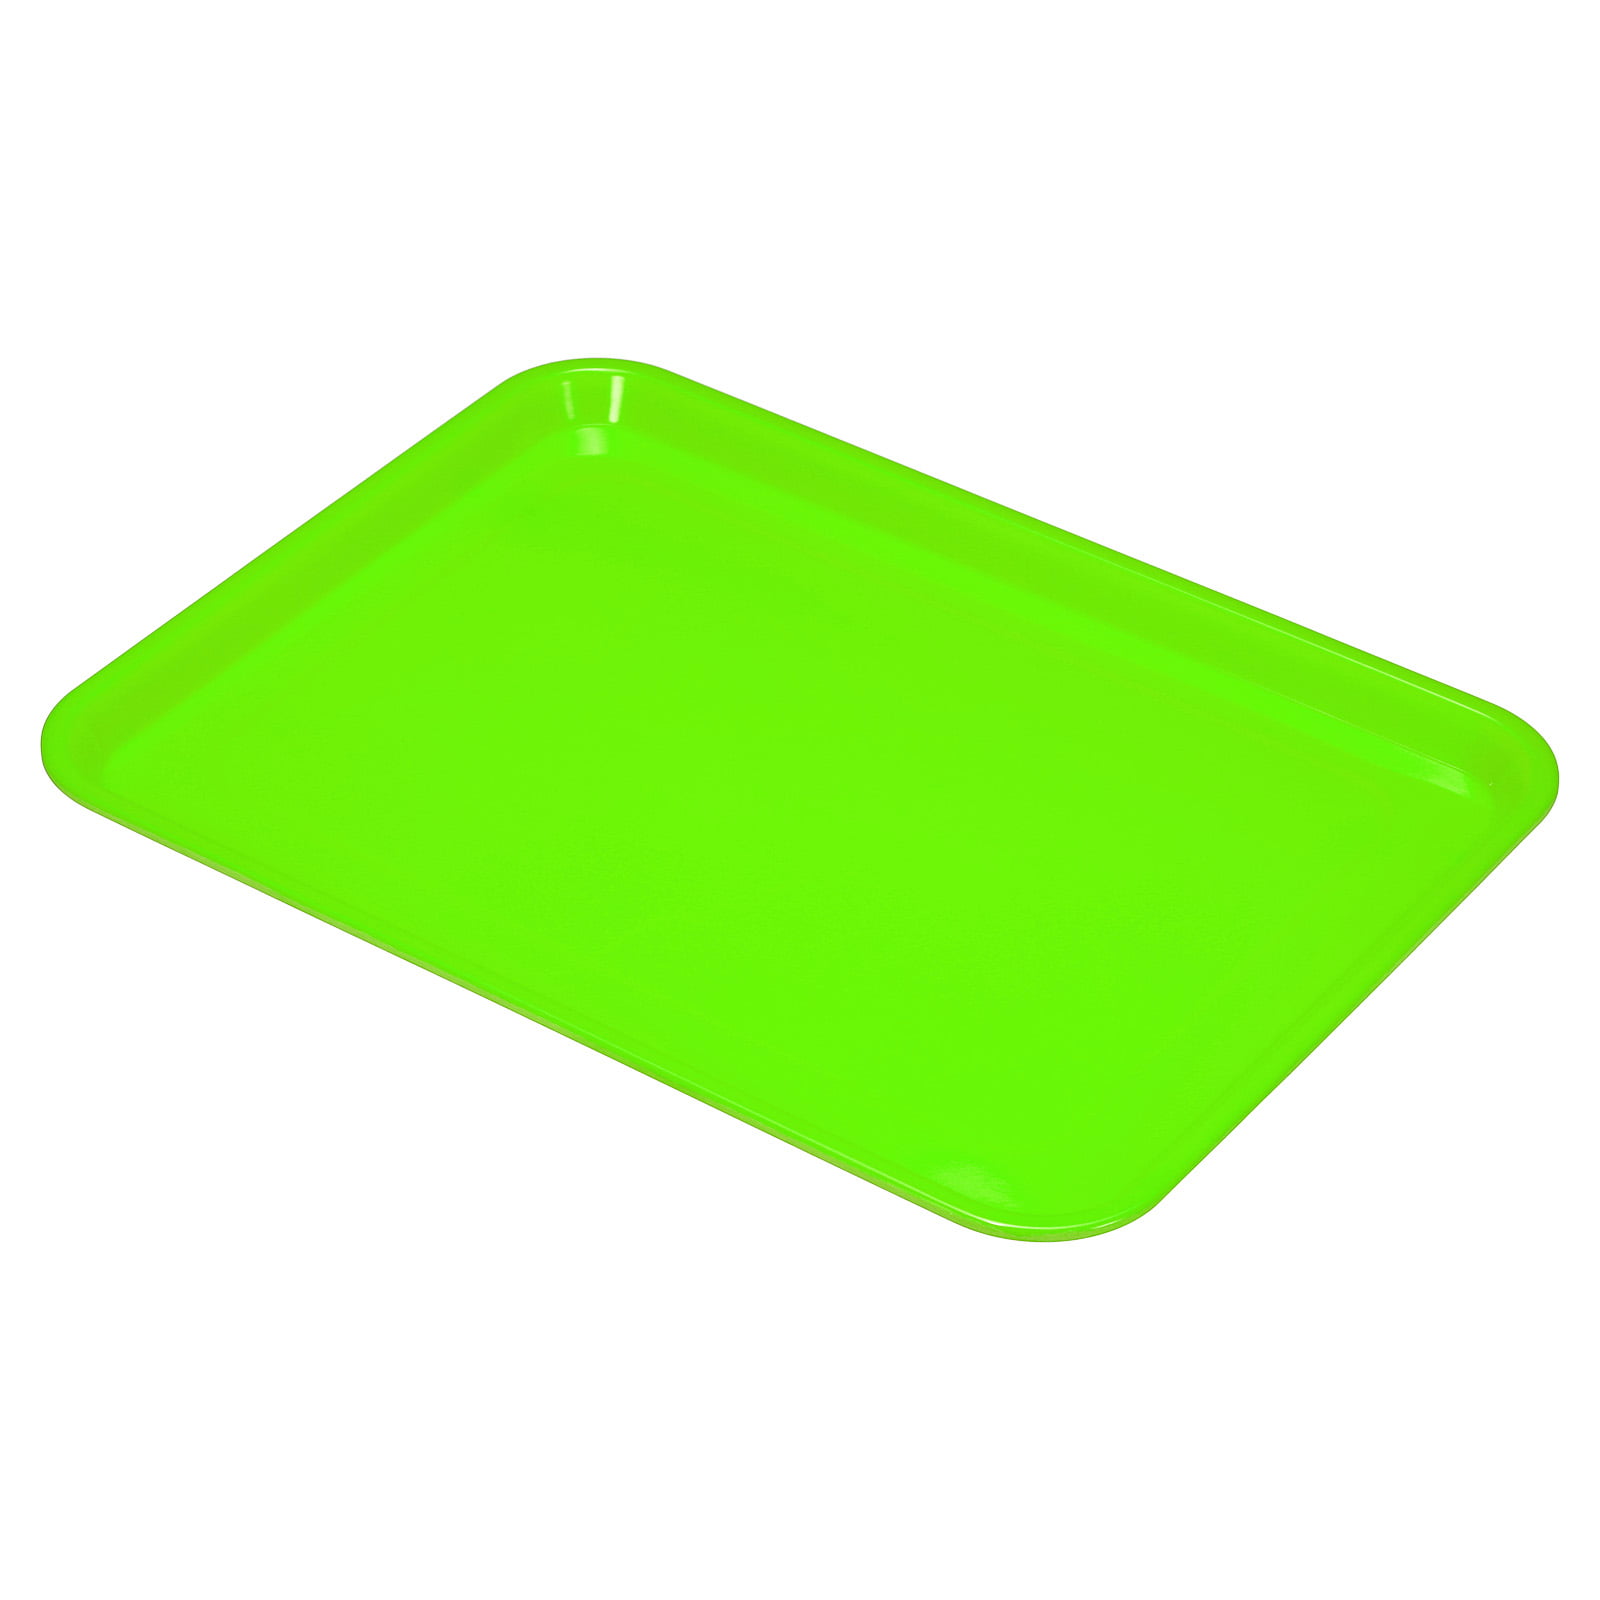 Uxcell 15x11 Fast Food Tray, Plastic Multi-Purpose Rectangle Serving Tray  for Restaurant Home Kitchen, Green